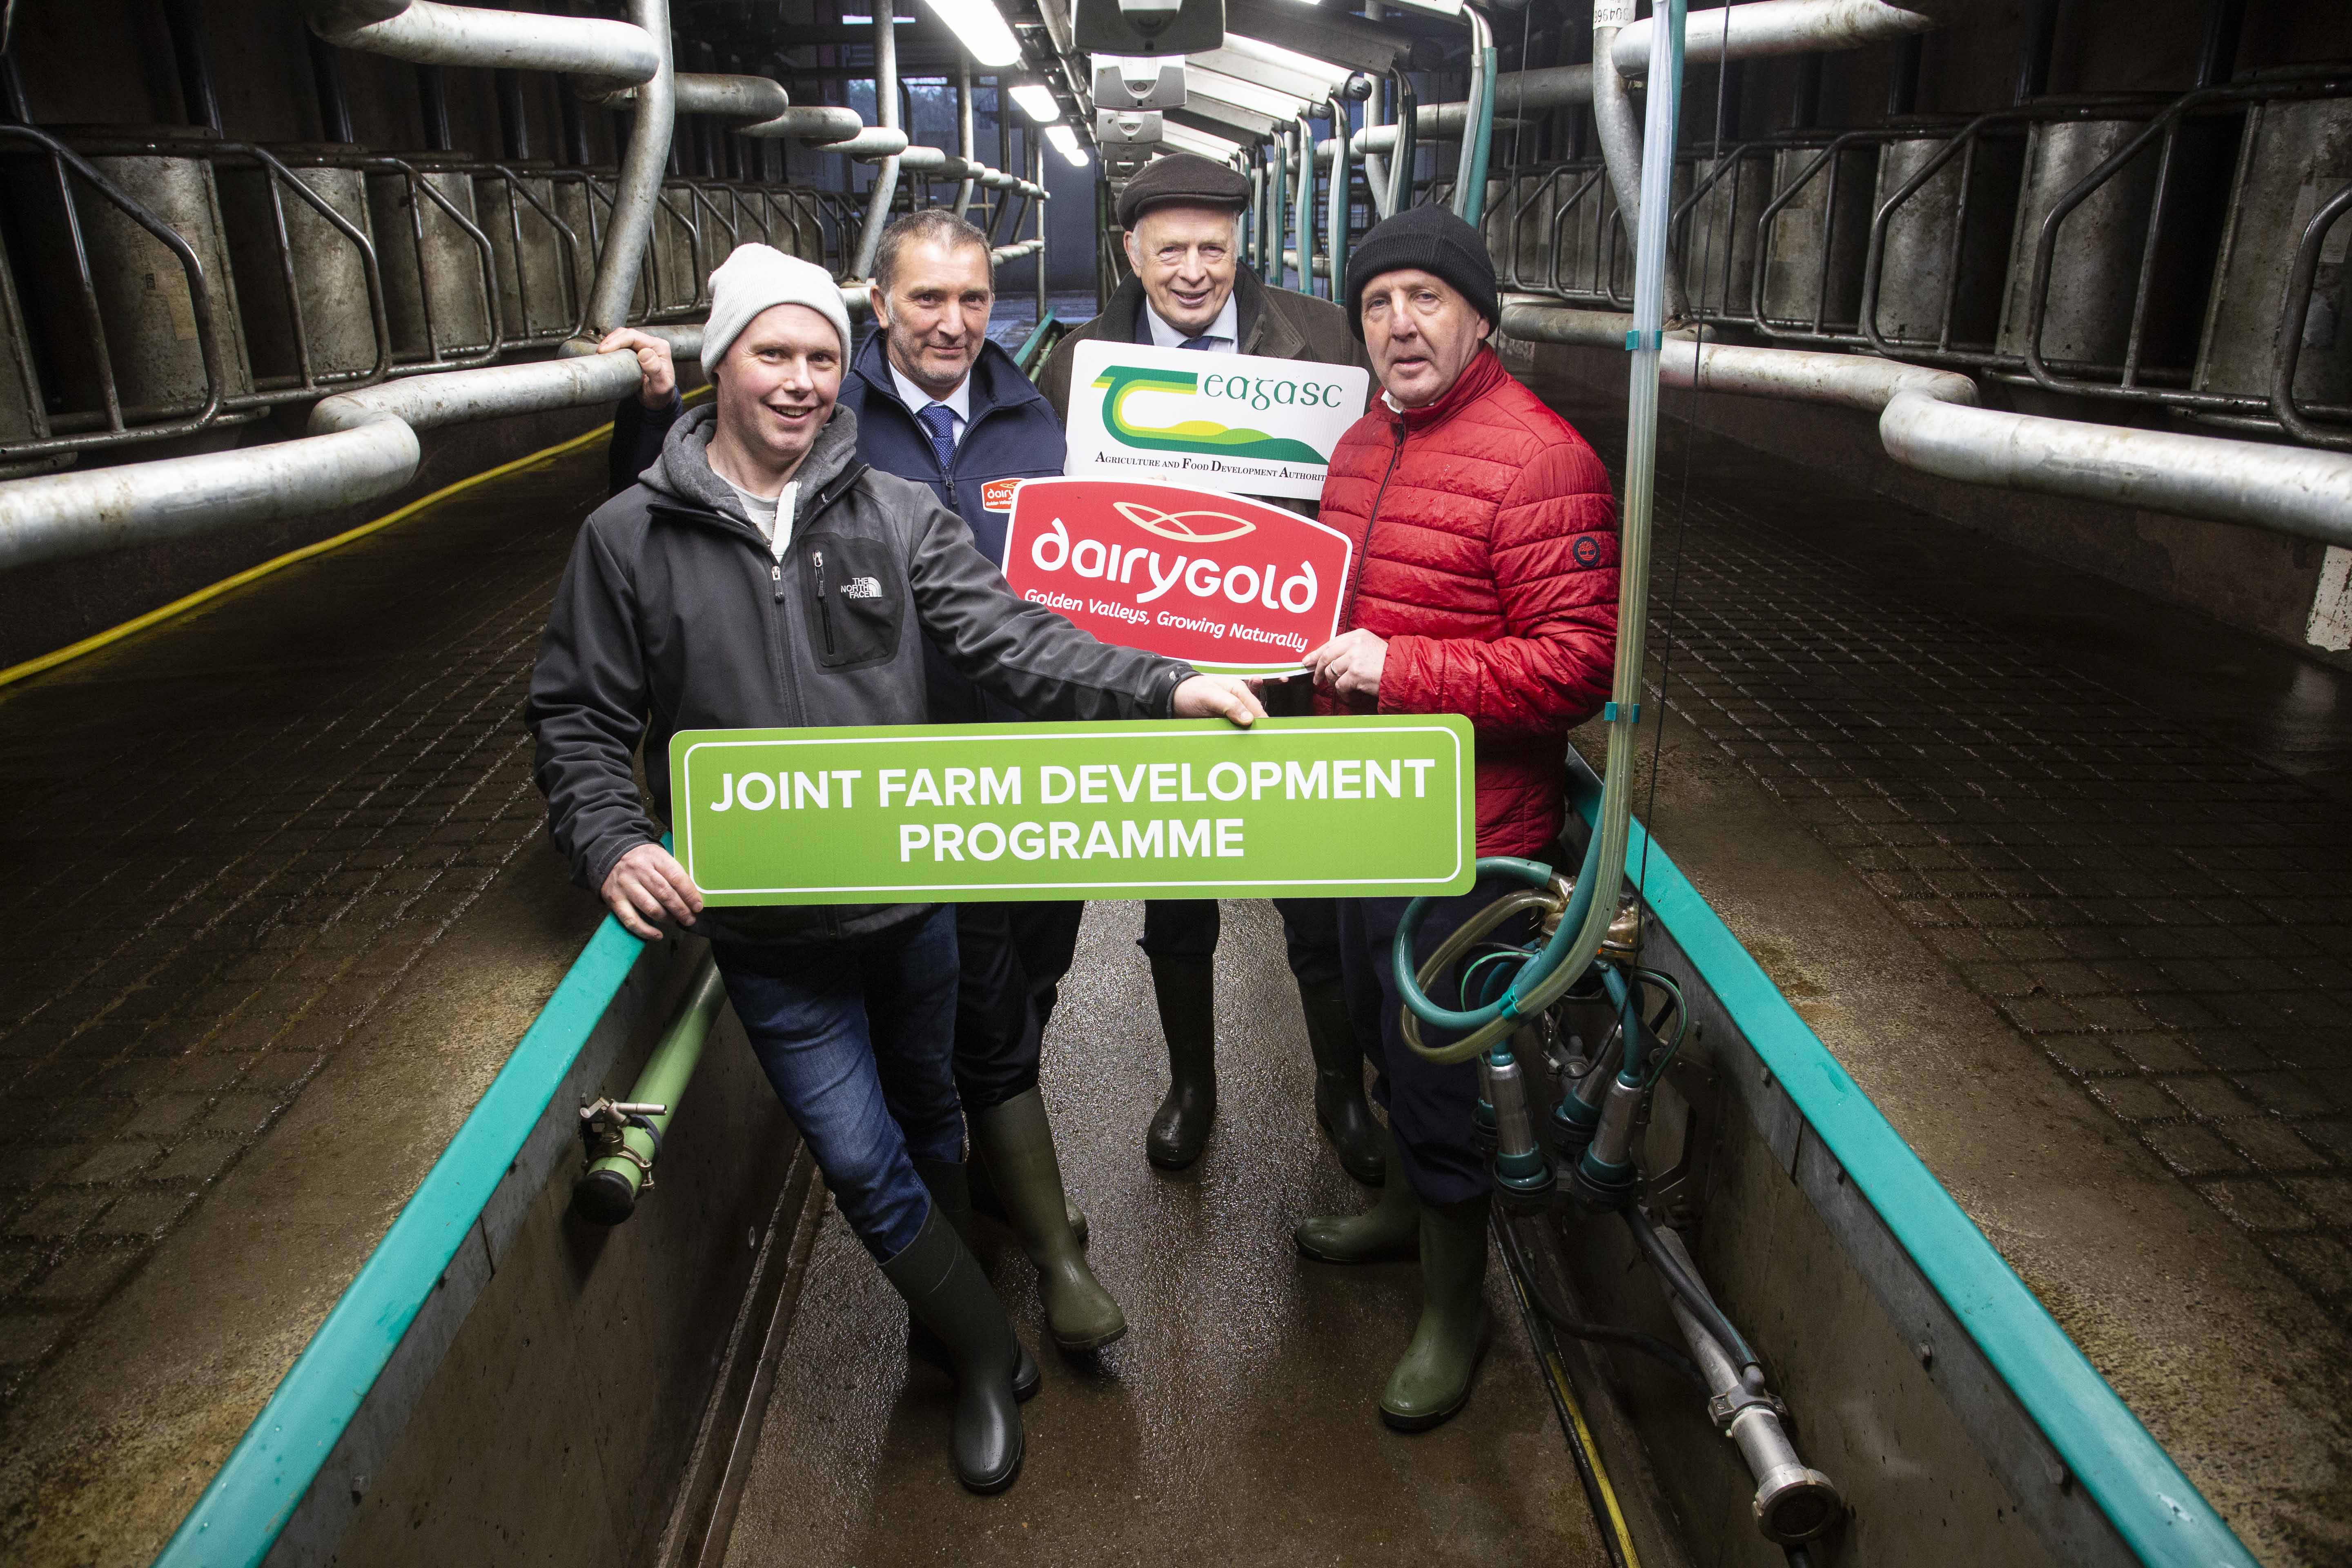 Dairygold/ Teagasc Joint Farm Development Programme Co-op invests €1m in new programme – Together Towards 2021